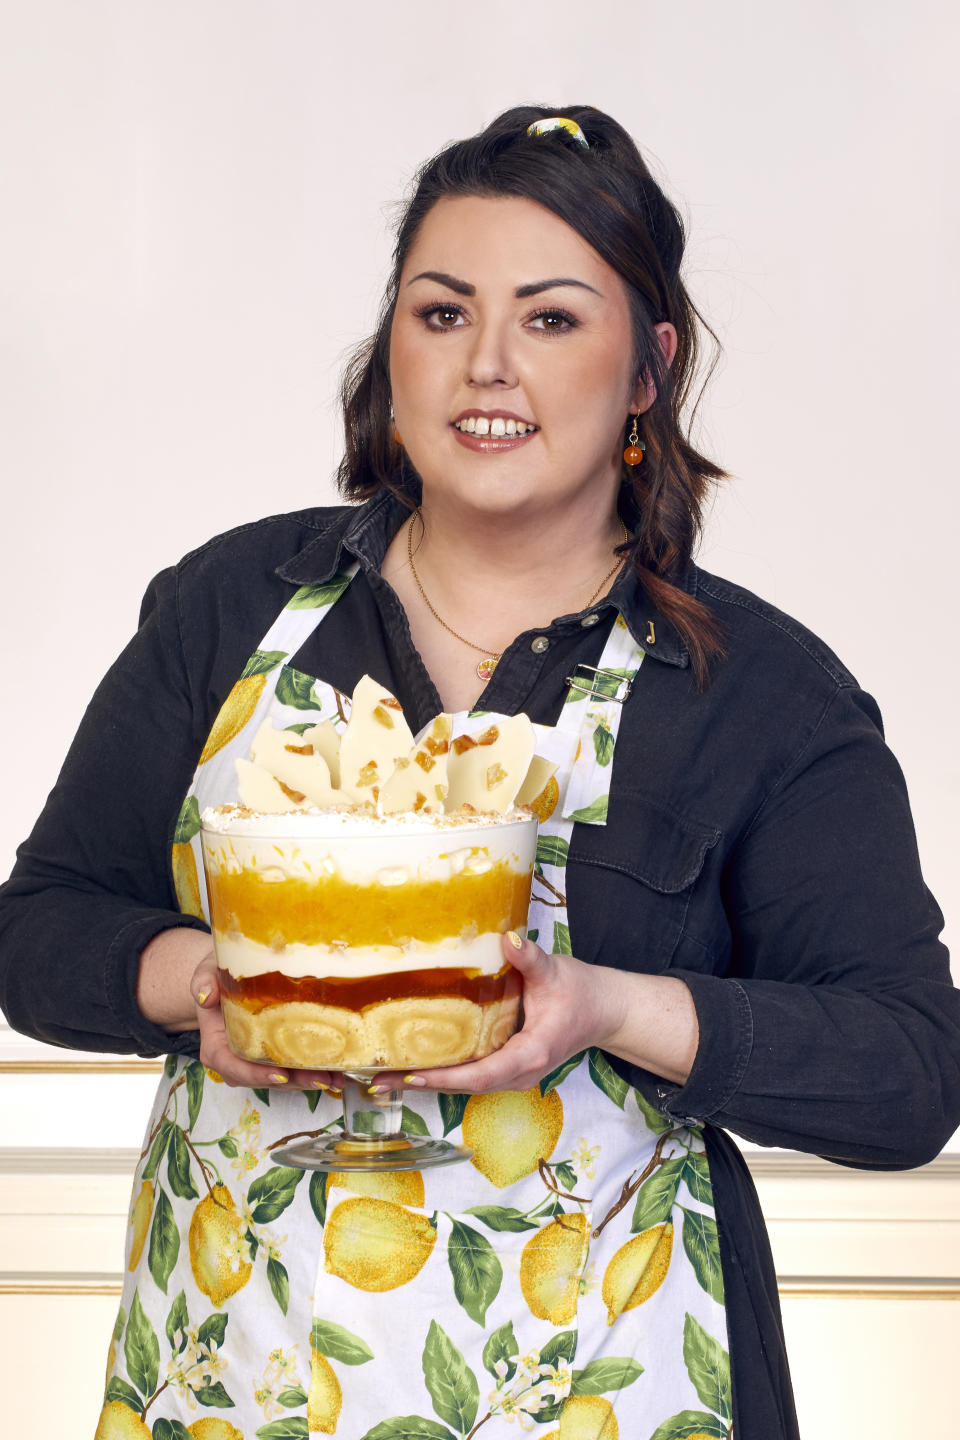 Ms Melvin was crowned winner of the Fortnum & Mason Platinum Pudding competition with her lemon Swiss roll and amaretti trifle to mark the Queen’s Platinum Jubilee celebrations (Nicky Johnston/PA)